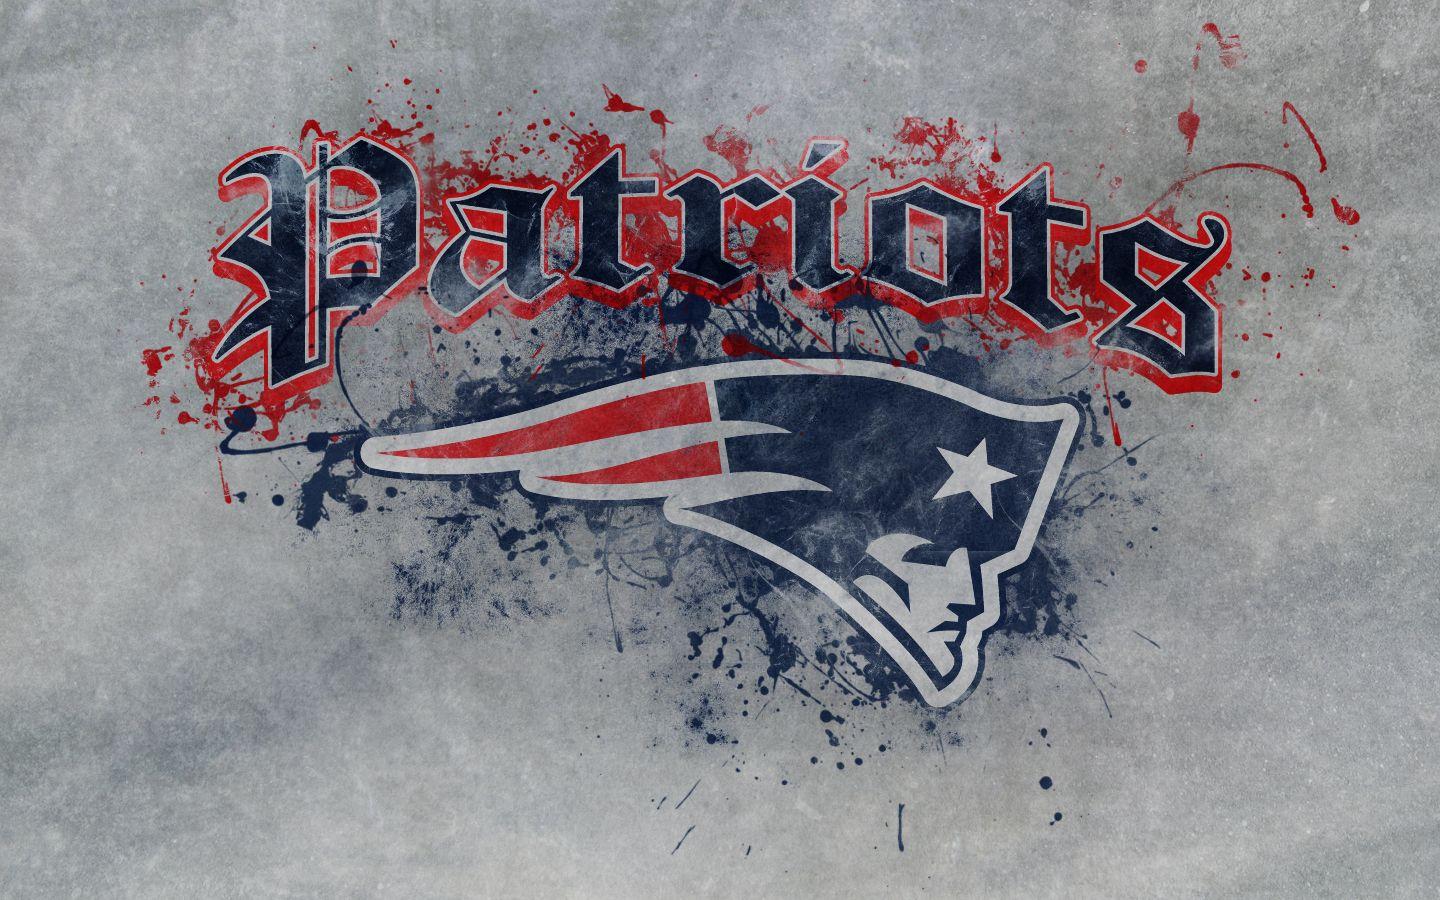 Patriots Wallpapers - Top Free Patriots Backgrounds - WallpaperAccess